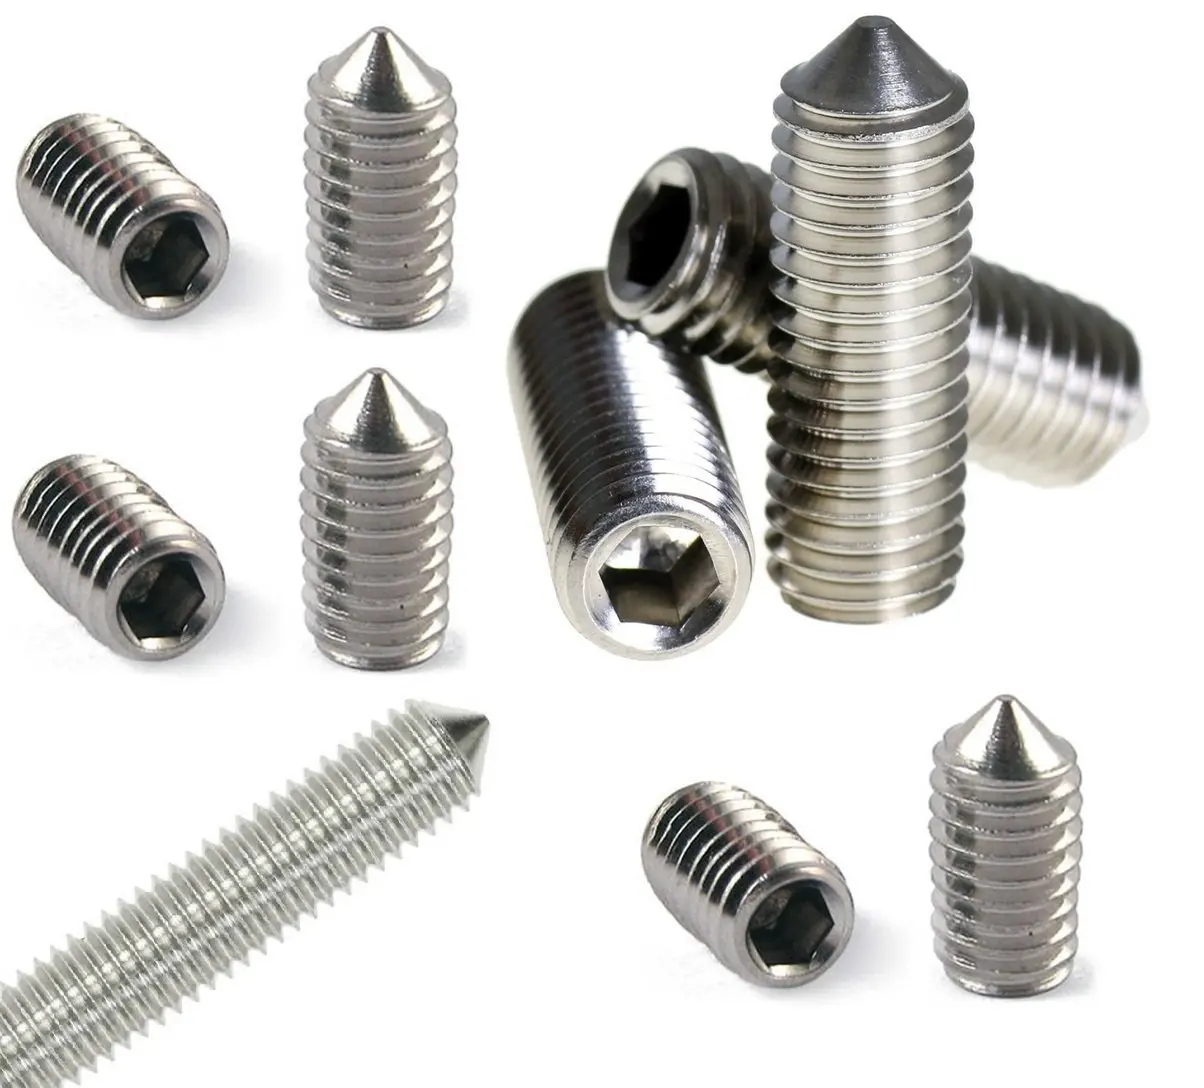 3mm Bolt Base M3 x 3 A2 Stainless Steel Cone Point Grub screws Hex Socket Set screw DIN 914-5 Pack